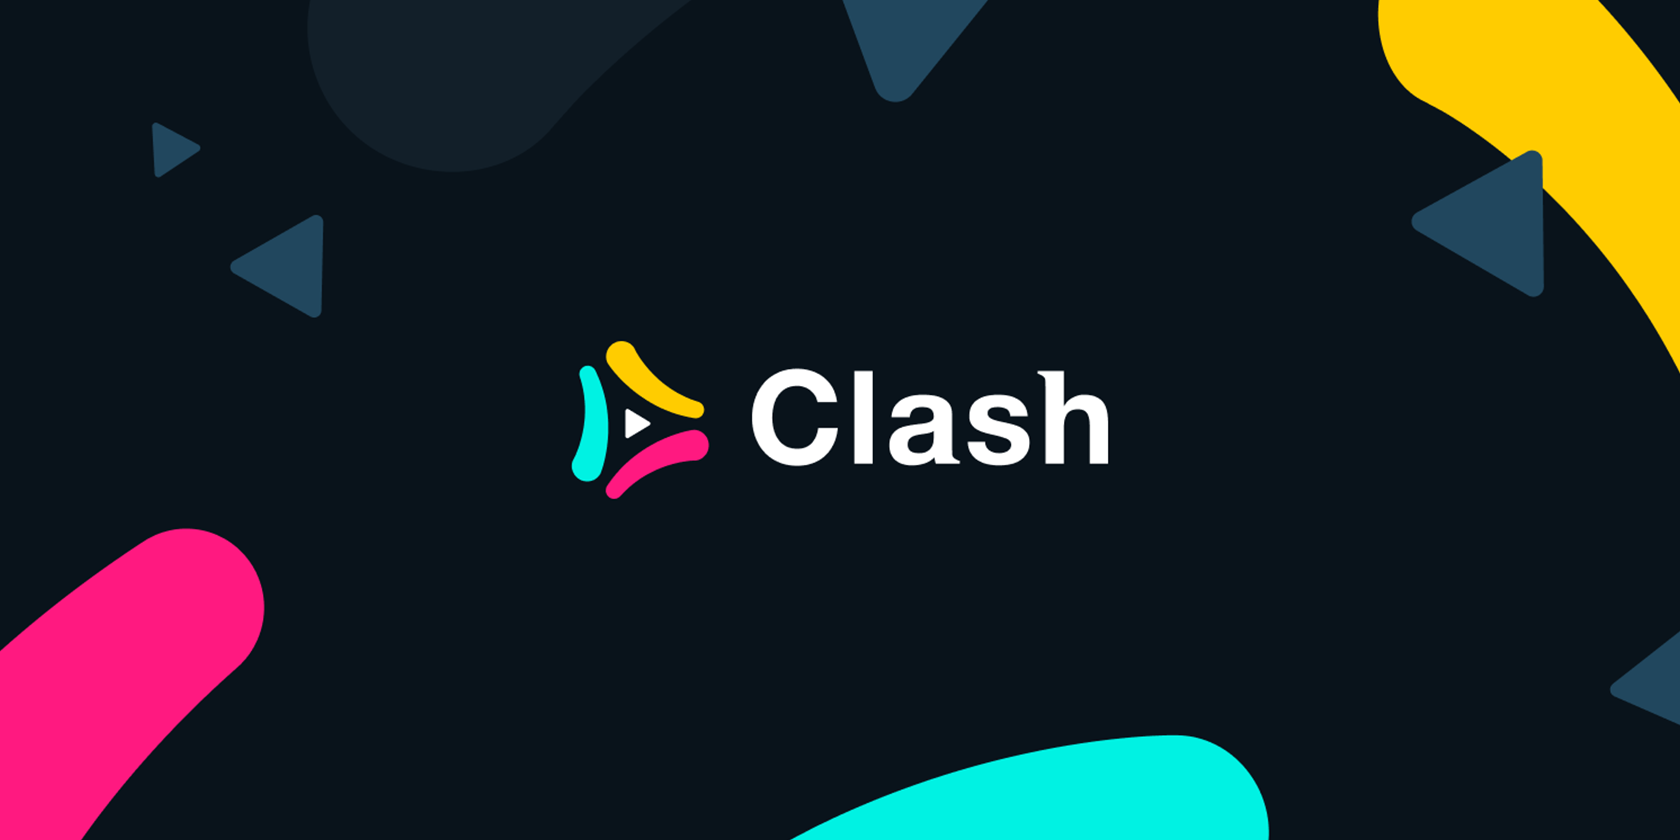 The colorful logo of video-sharing app Clash